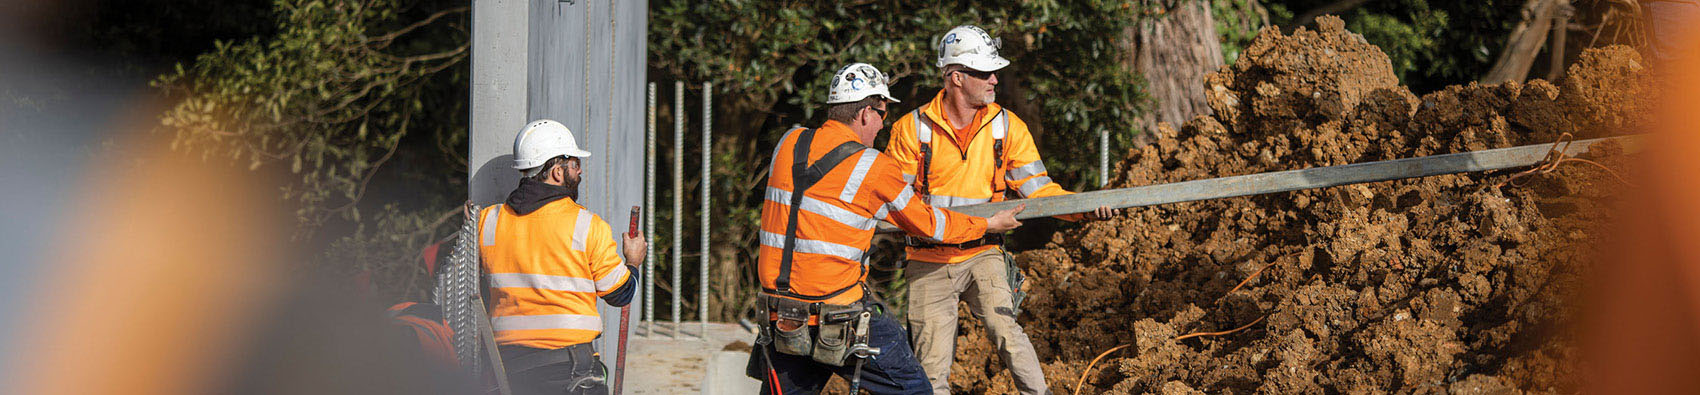 Three workers wearing orange hi vis jackets and safety helmets. They are working outdoors and there is a concrete beam and a pile of dirt. Two workers are lifting a wooden beam.